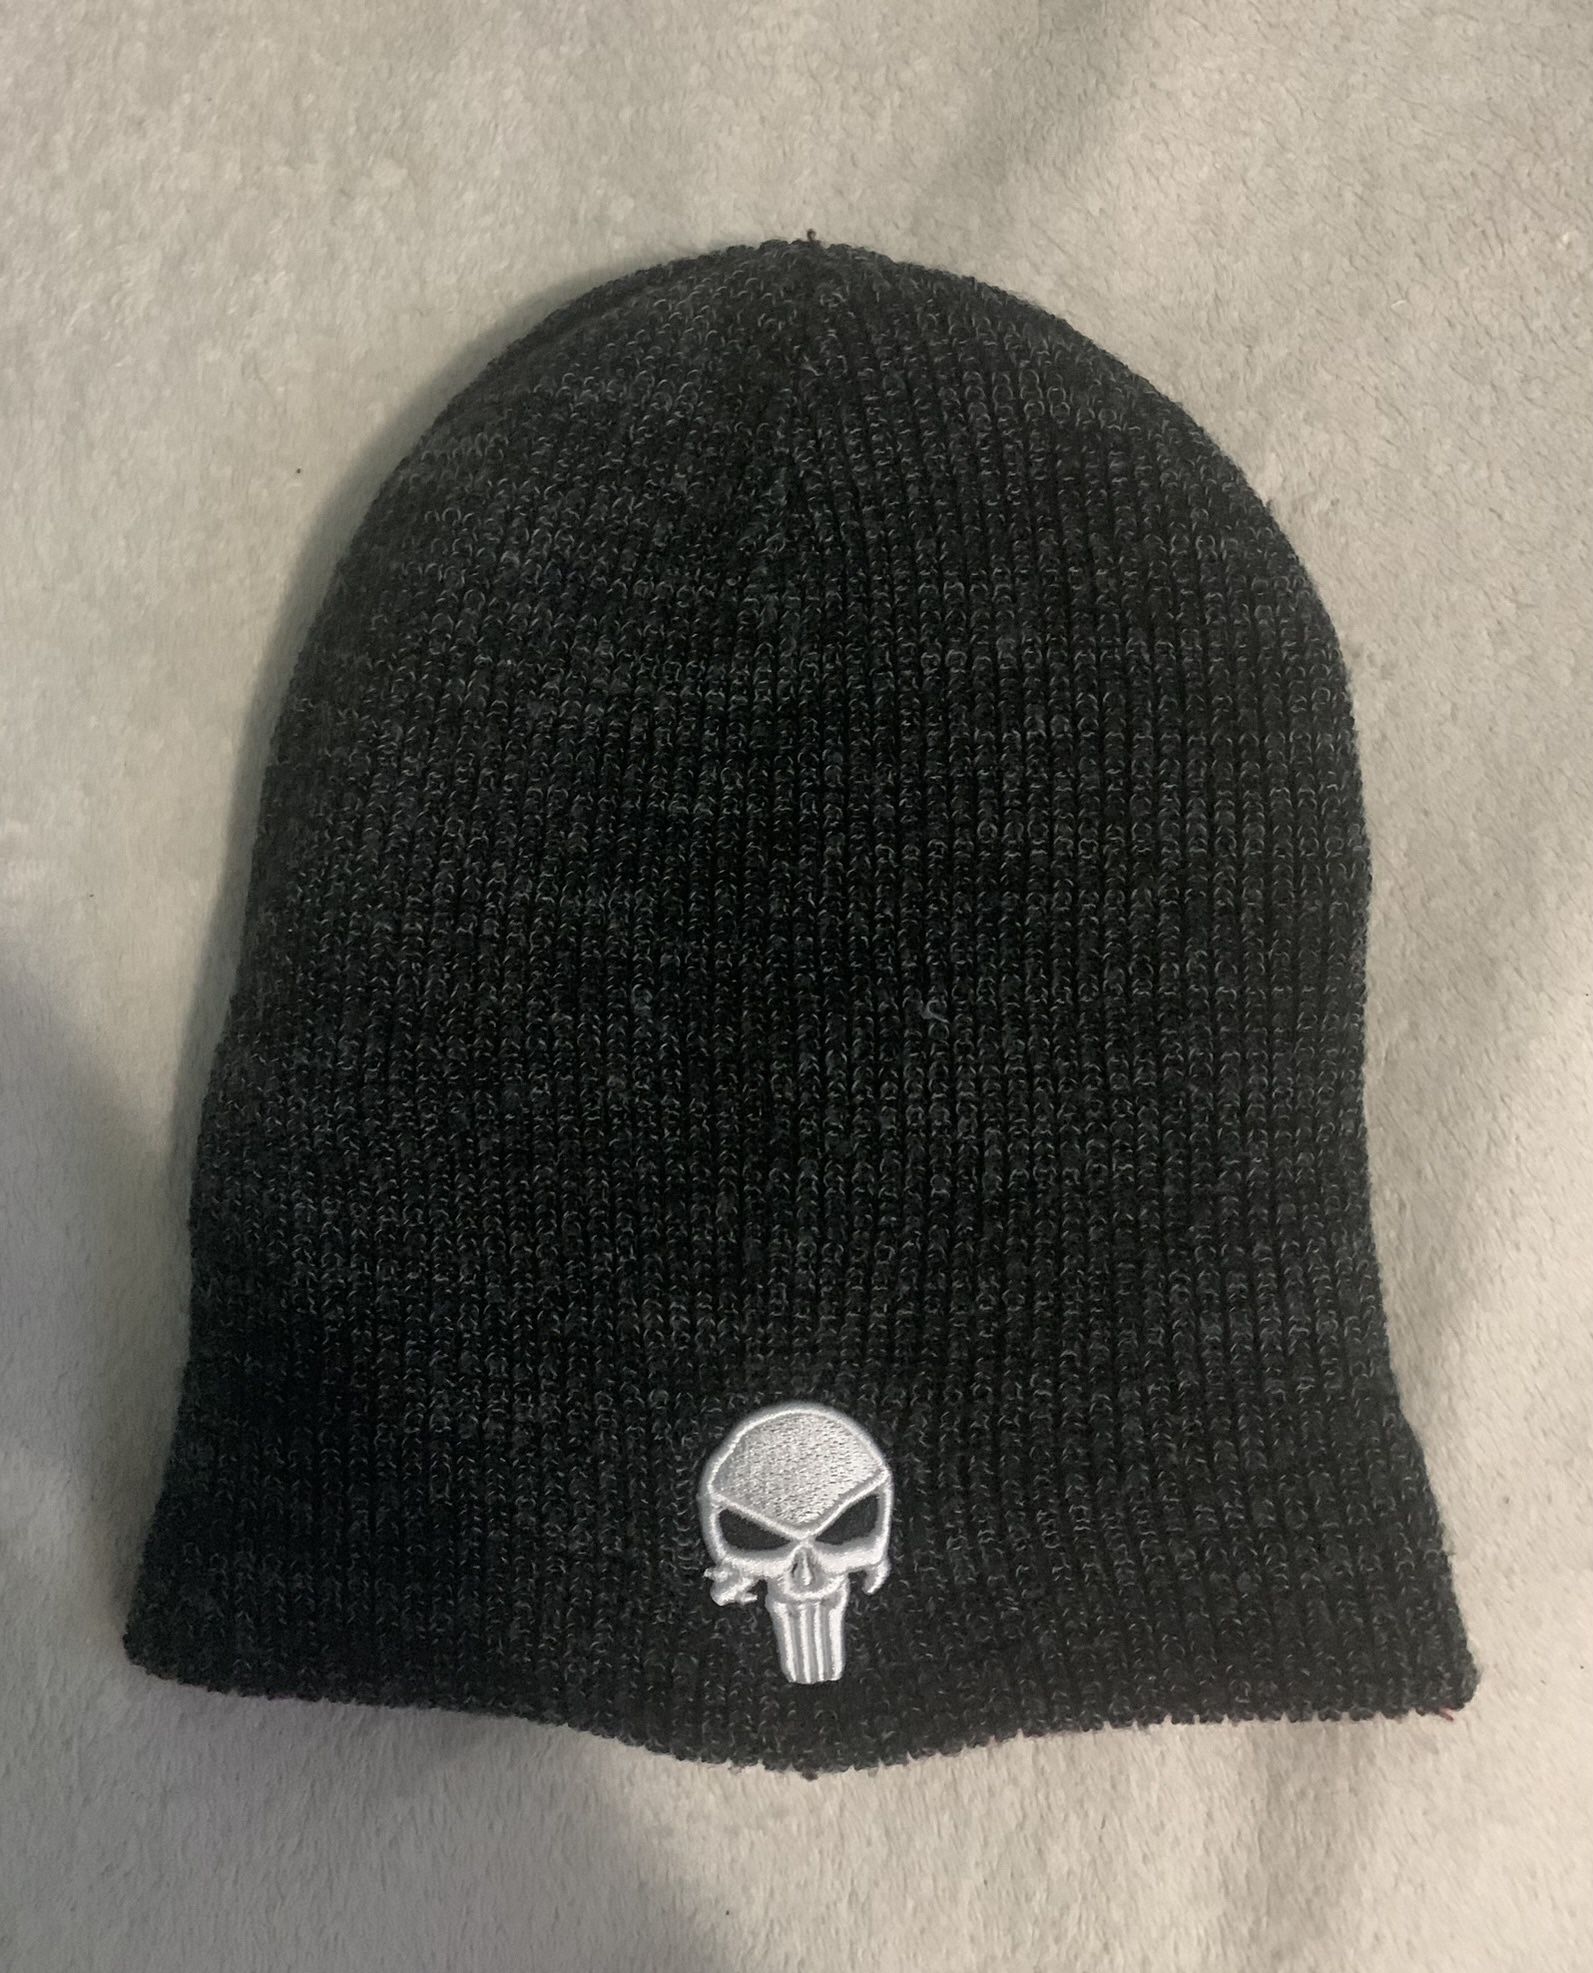 Marvel Daredevil DD & Punisher Reversible Beanie Knit Hat Cap Loot Crate